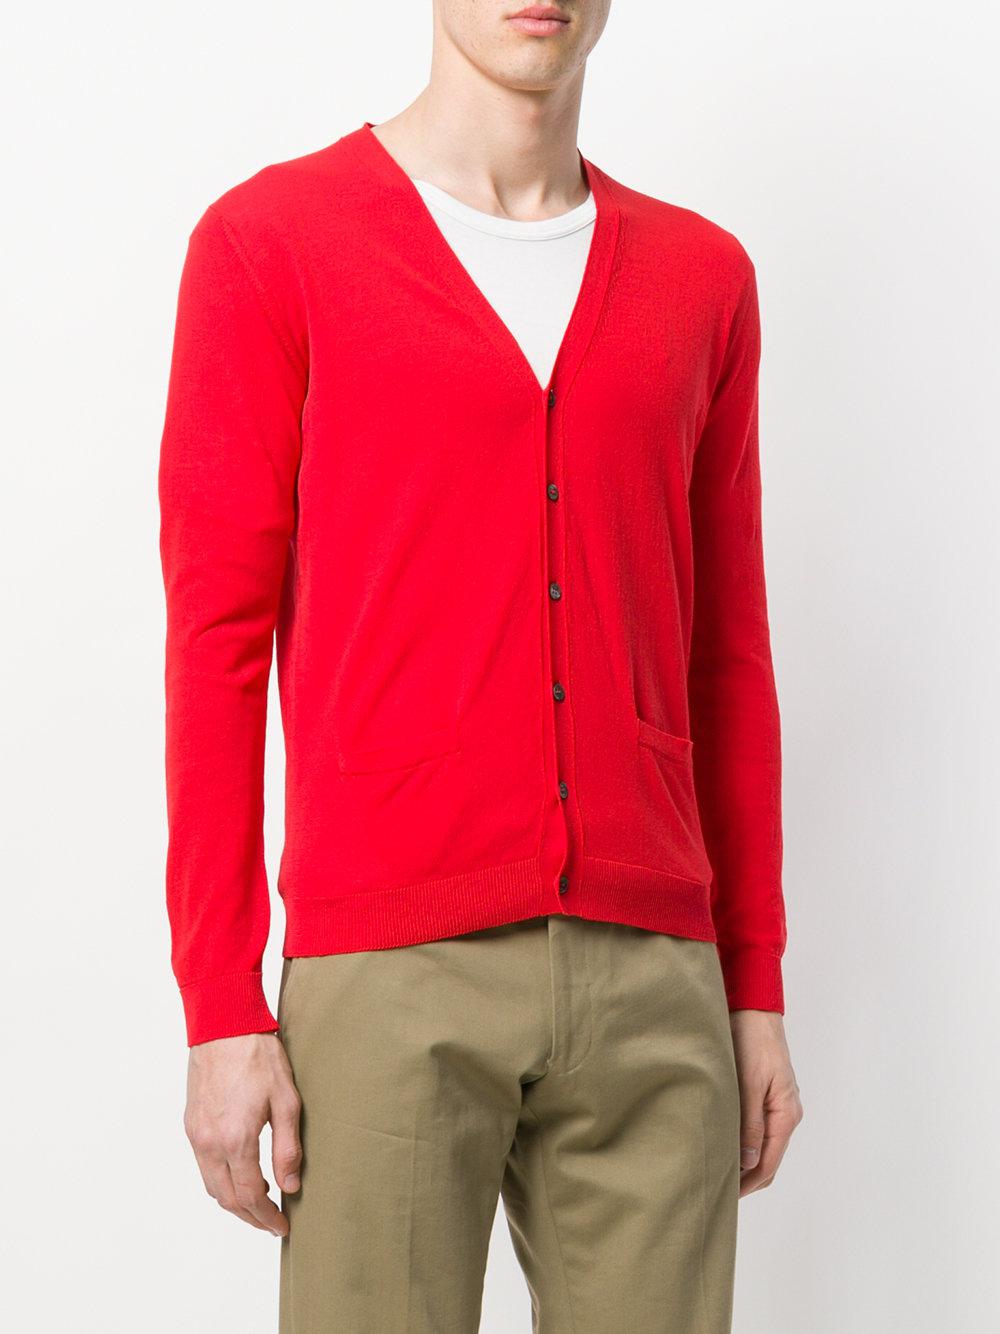 Roberto Collina Cotton Slim-fit Cardigan in Red for Men - Lyst